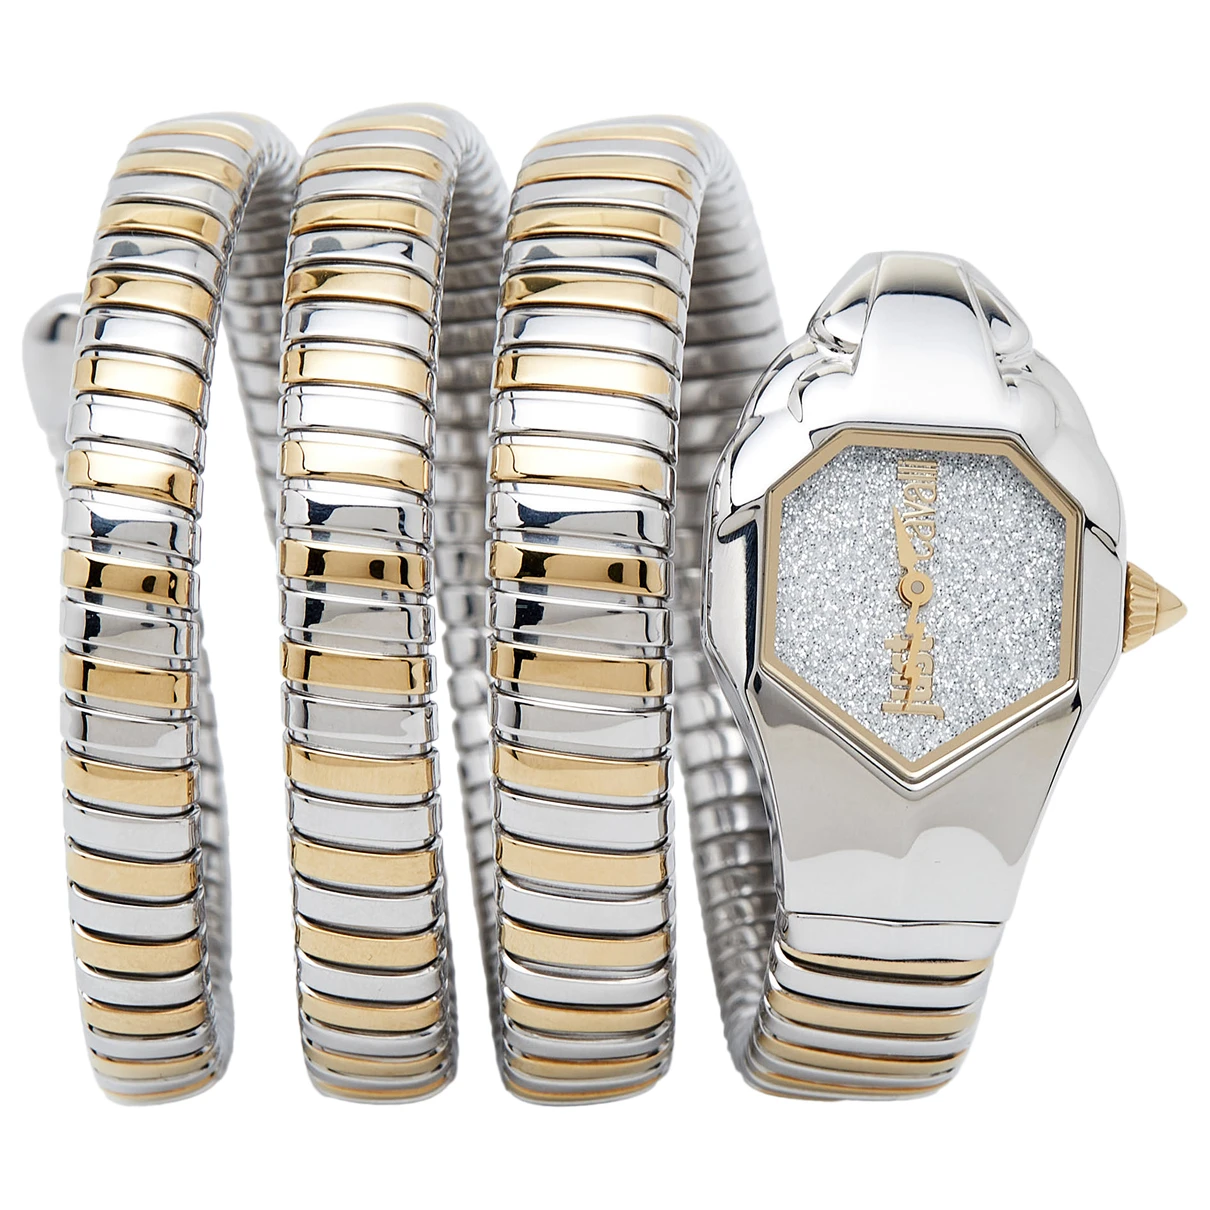 Pre-owned Just Cavalli Watch In Metallic